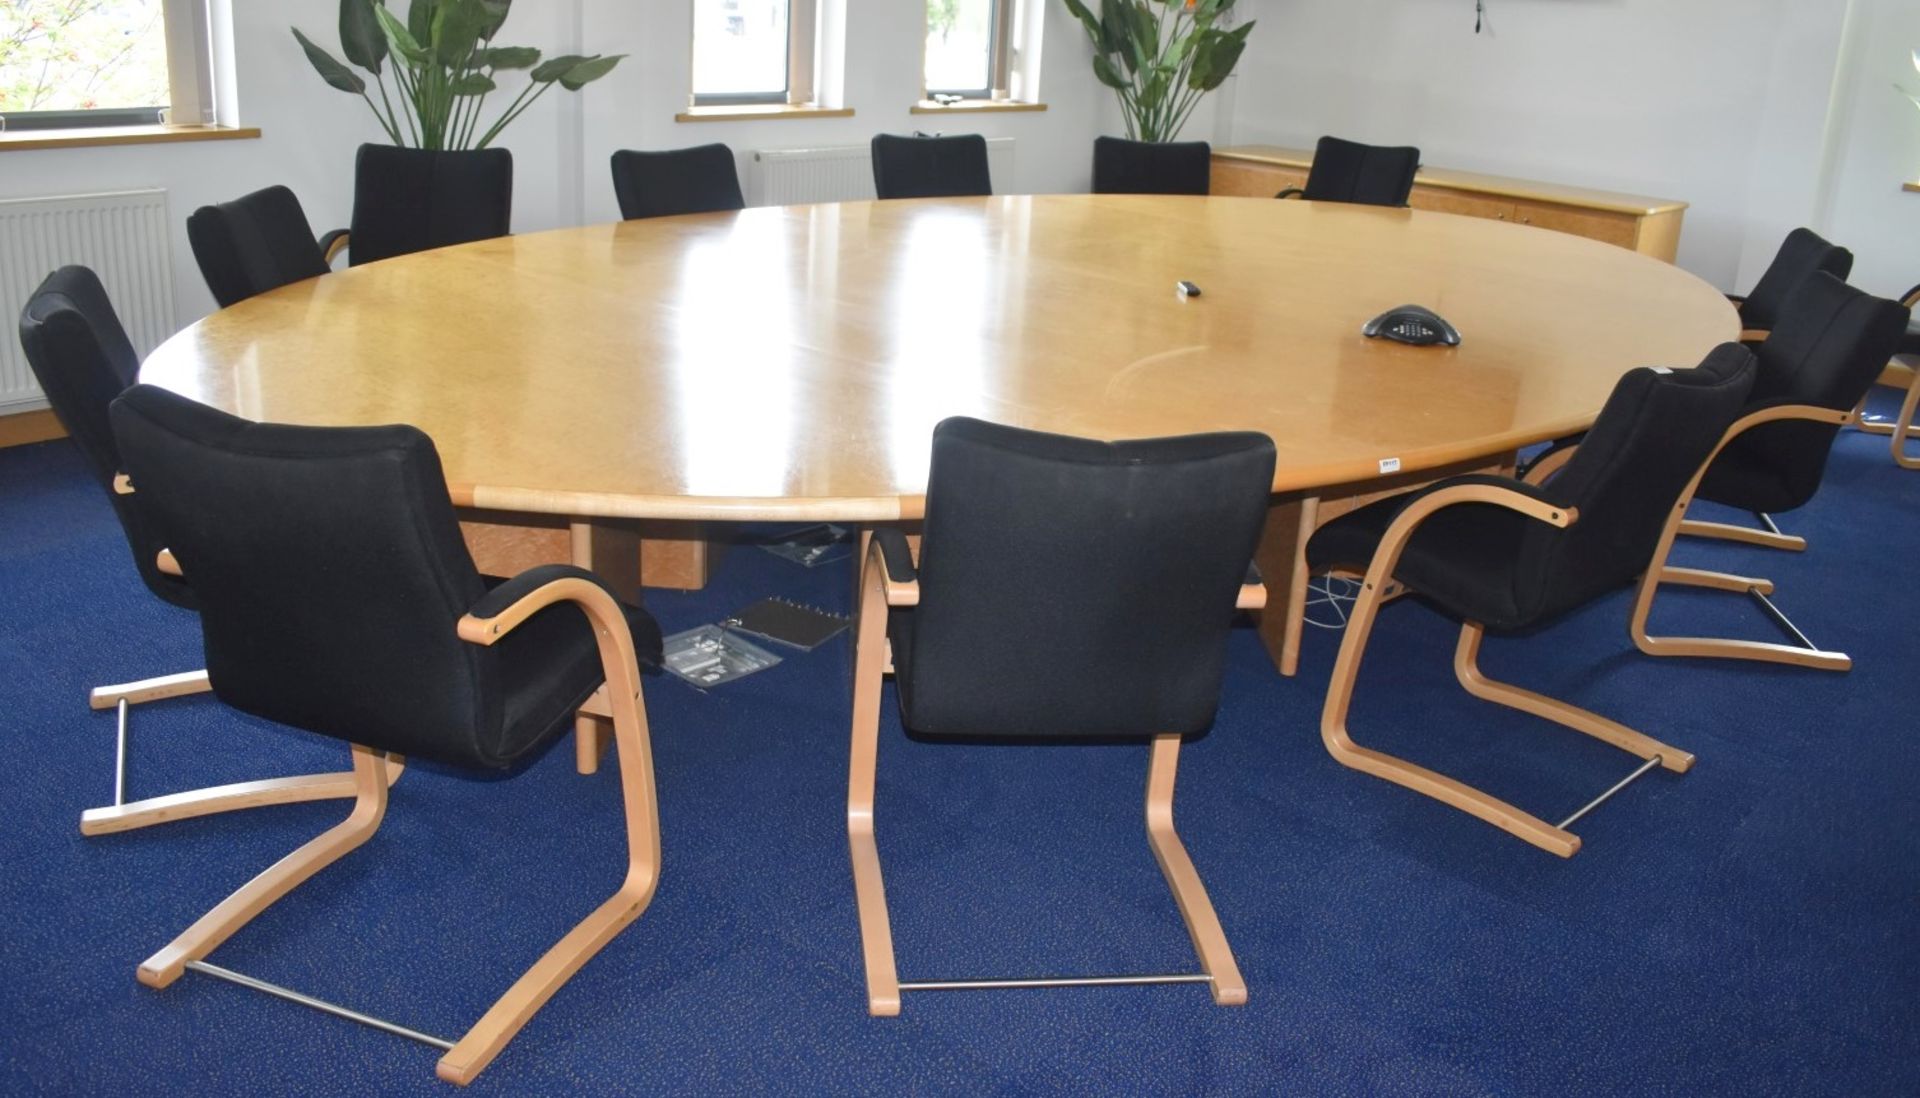 13 x Cantilever Office Meeting Chairs With Bentwood Frames and Black Fabric Seats - H87 x W48 x - Image 2 of 7